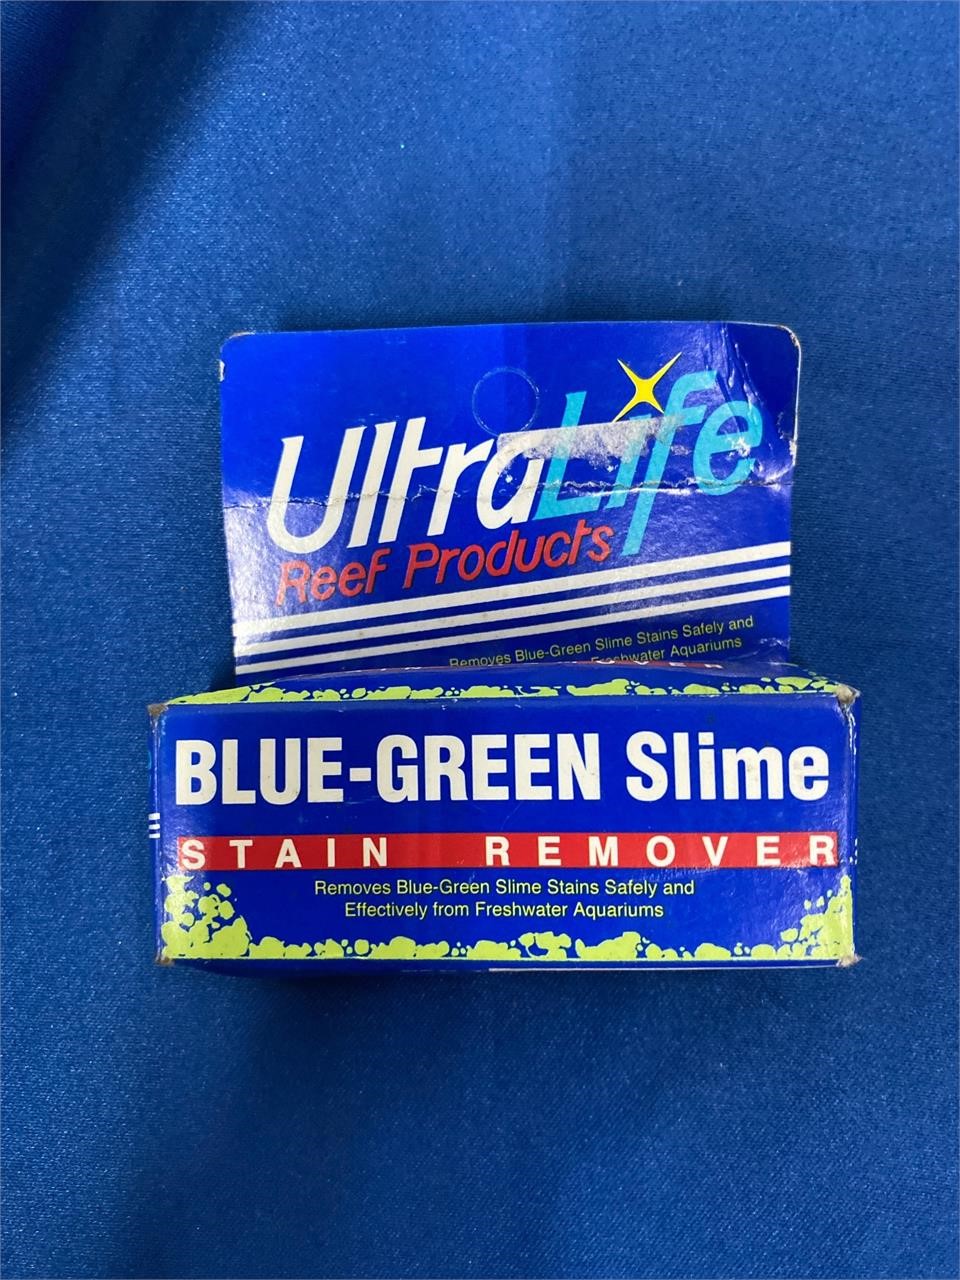 Blue green slime stain remover